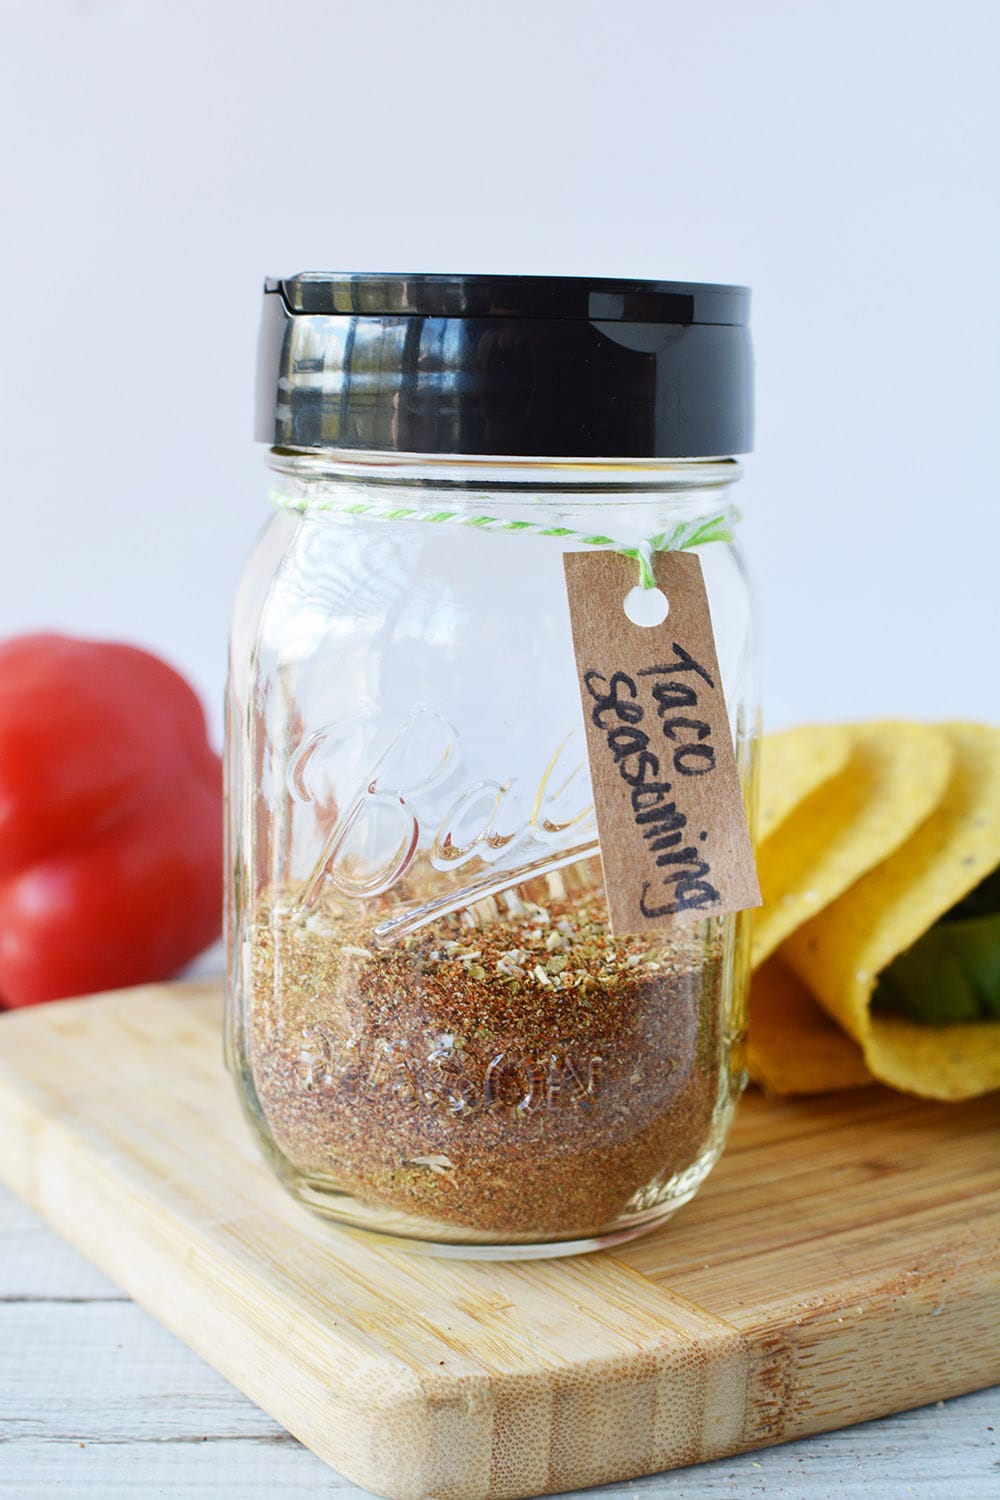 Jar of taco seasoning mix by a red pepper and taco shells. 